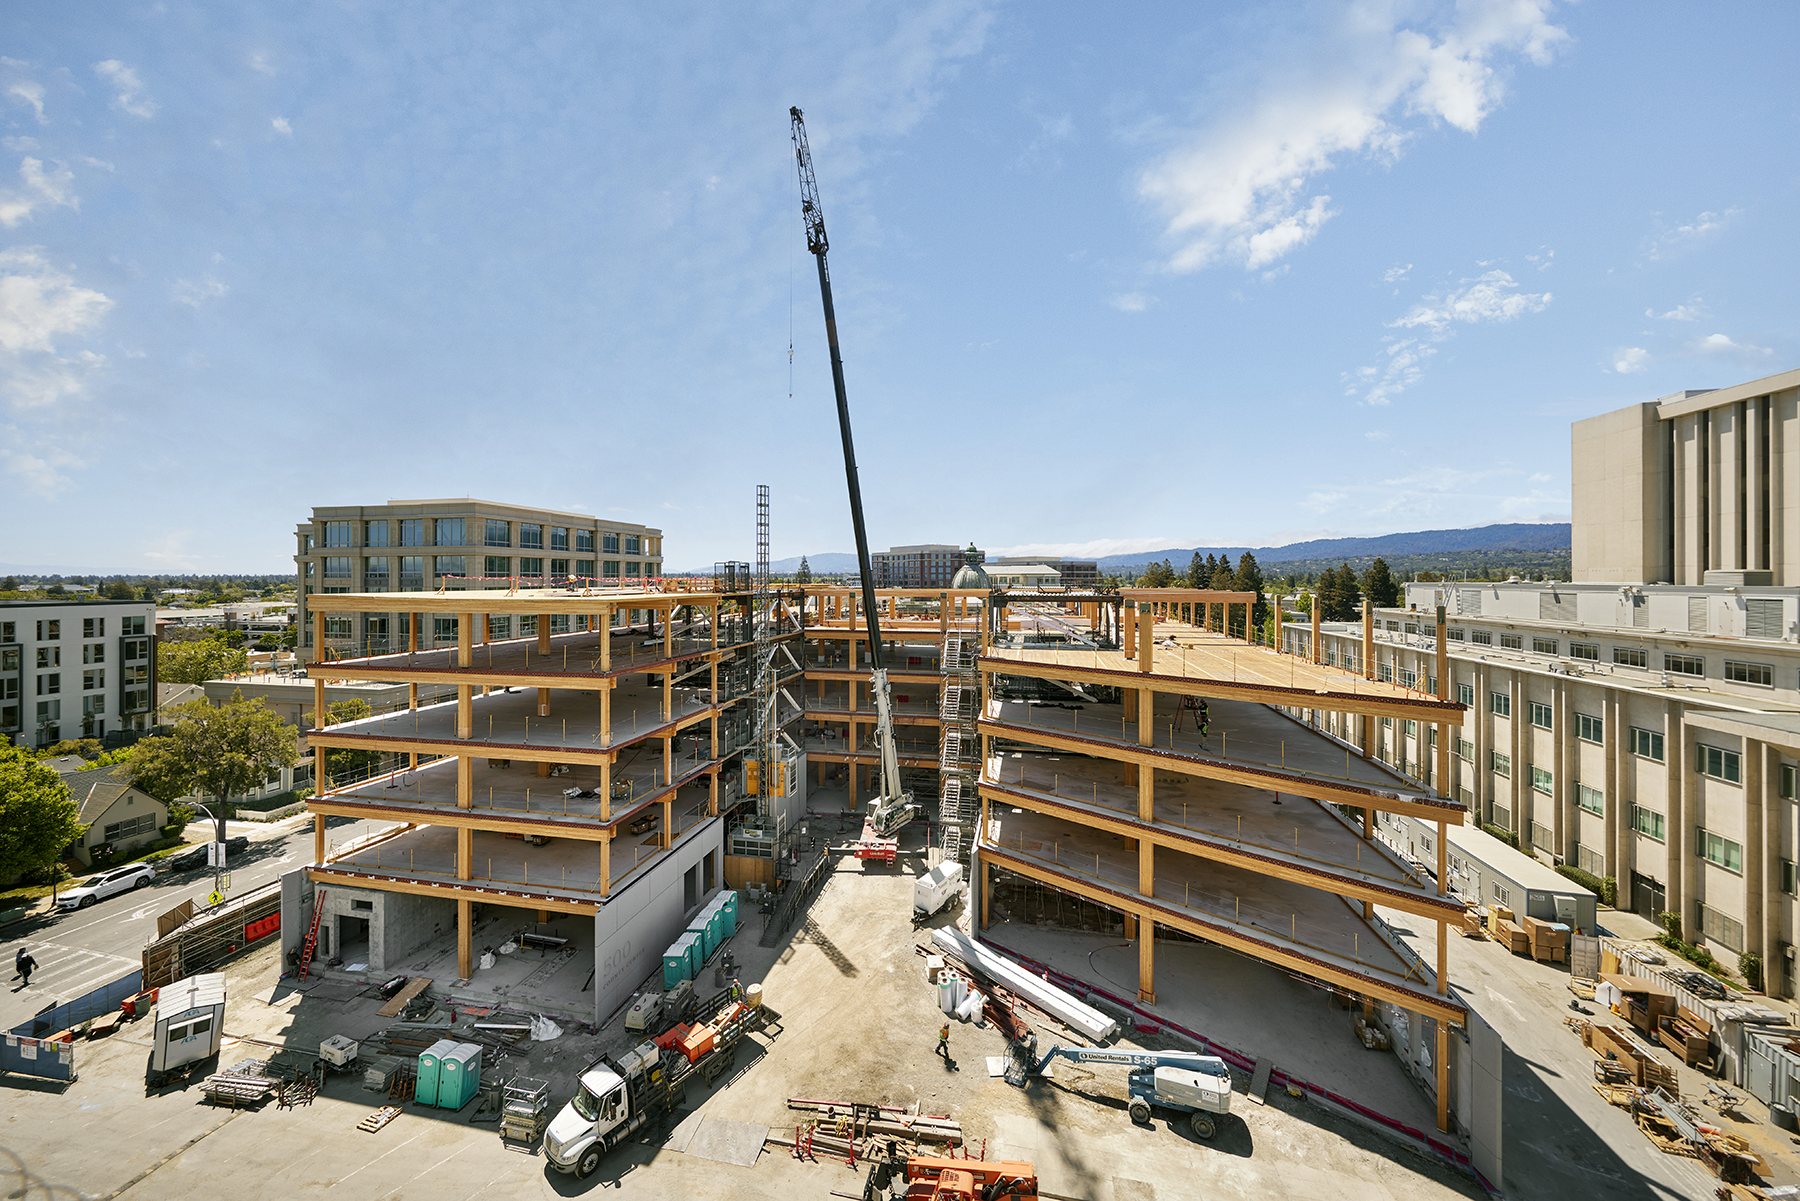 Expected to open by year’s end, the COB3 project features a five-story, 207,000 sq ft structure that will serve as the San Mateo County government’s headquarters. (Photograph courtesy SOM)